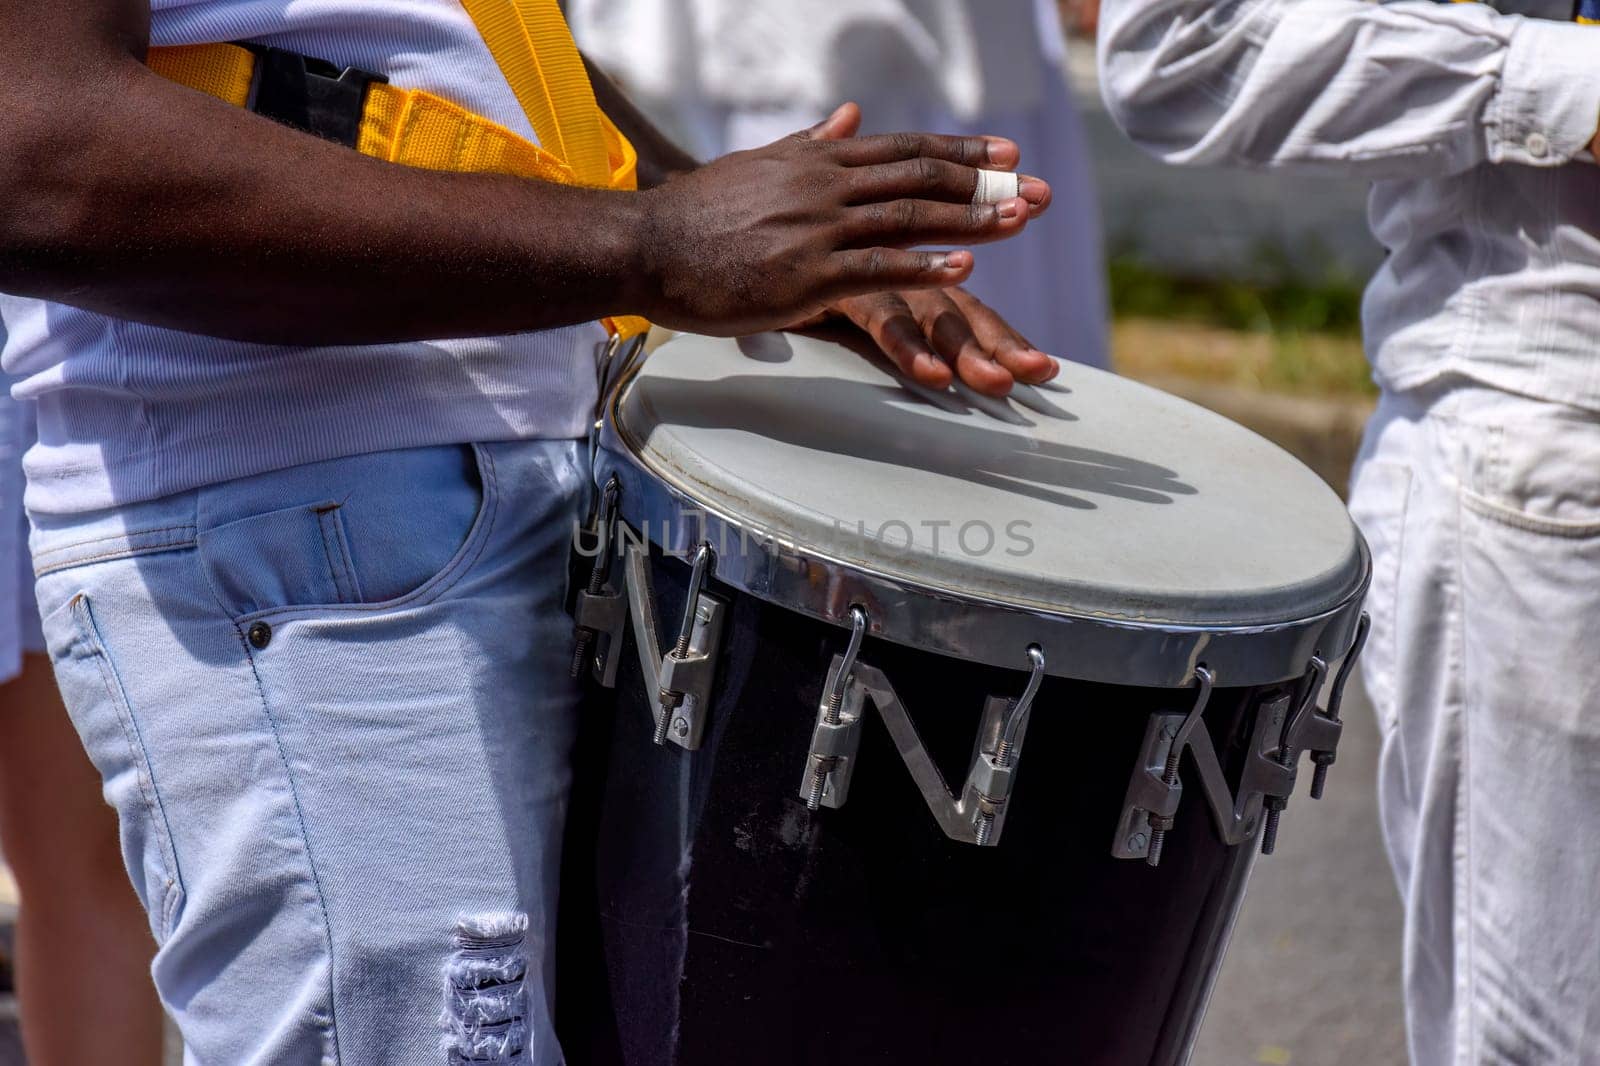 Atabaque drum player in the streets of Brazil during brazilian samba presentation